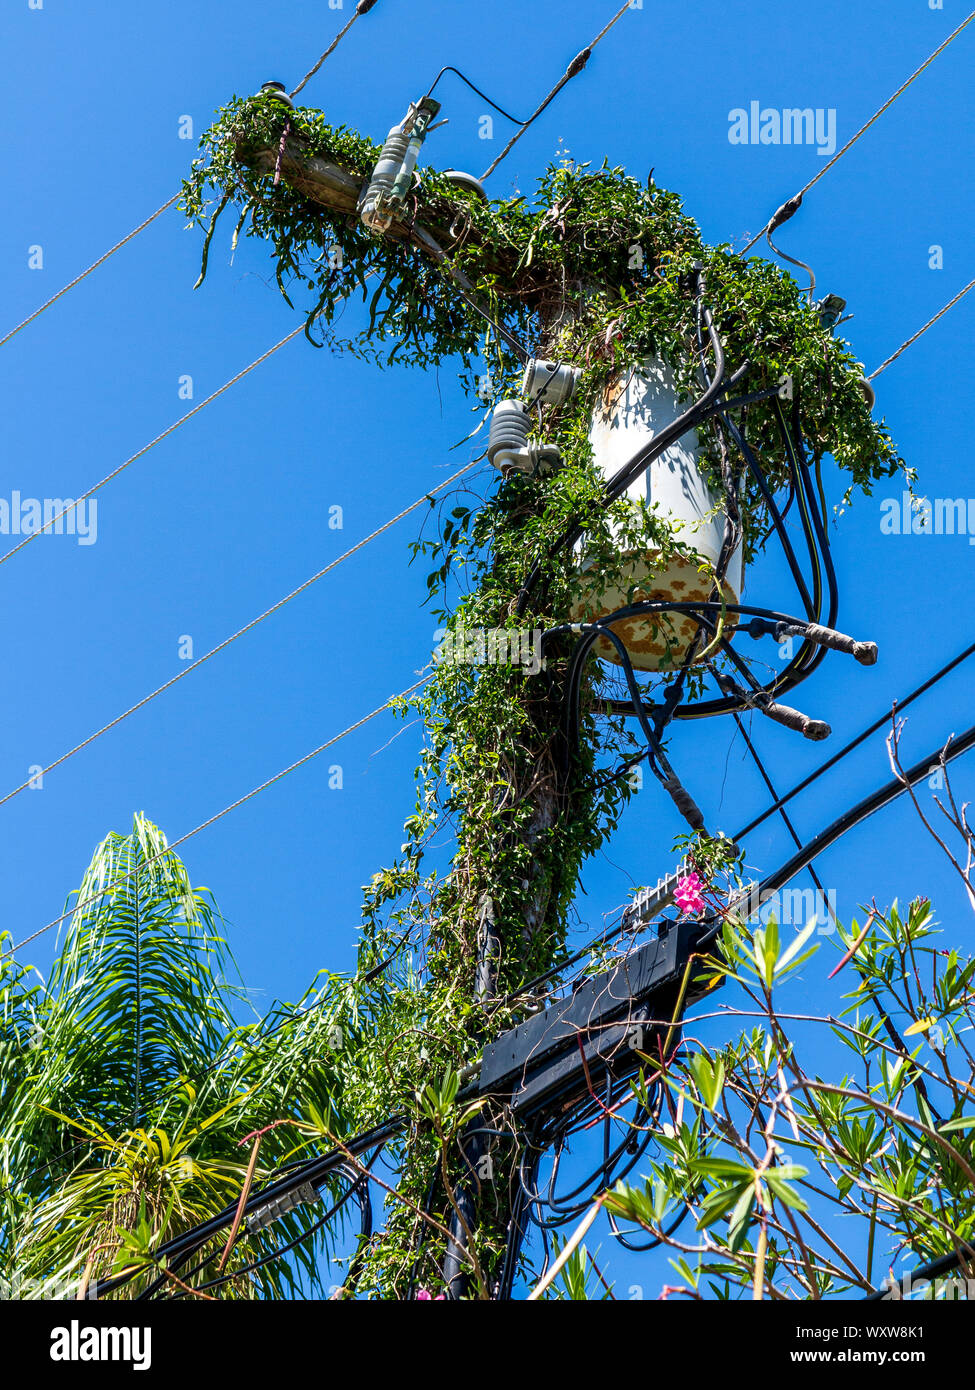 Power lines and electricity poles overgrown with climbing plants against a blue sky in Bermuda Stock Photo